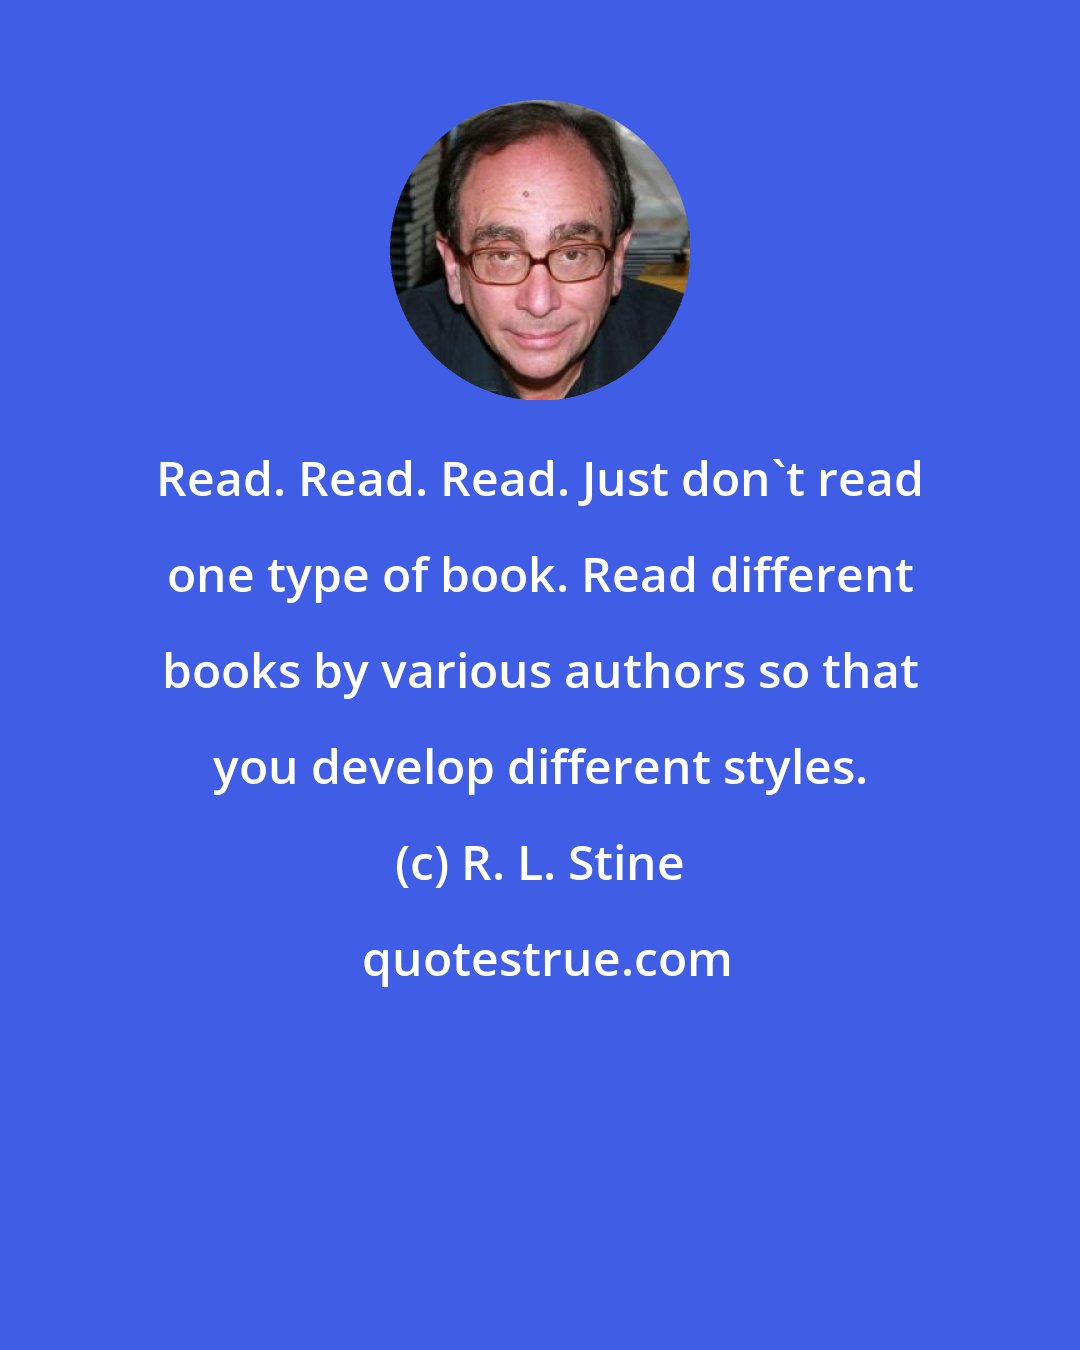 R. L. Stine: Read. Read. Read. Just don't read one type of book. Read different books by various authors so that you develop different styles.